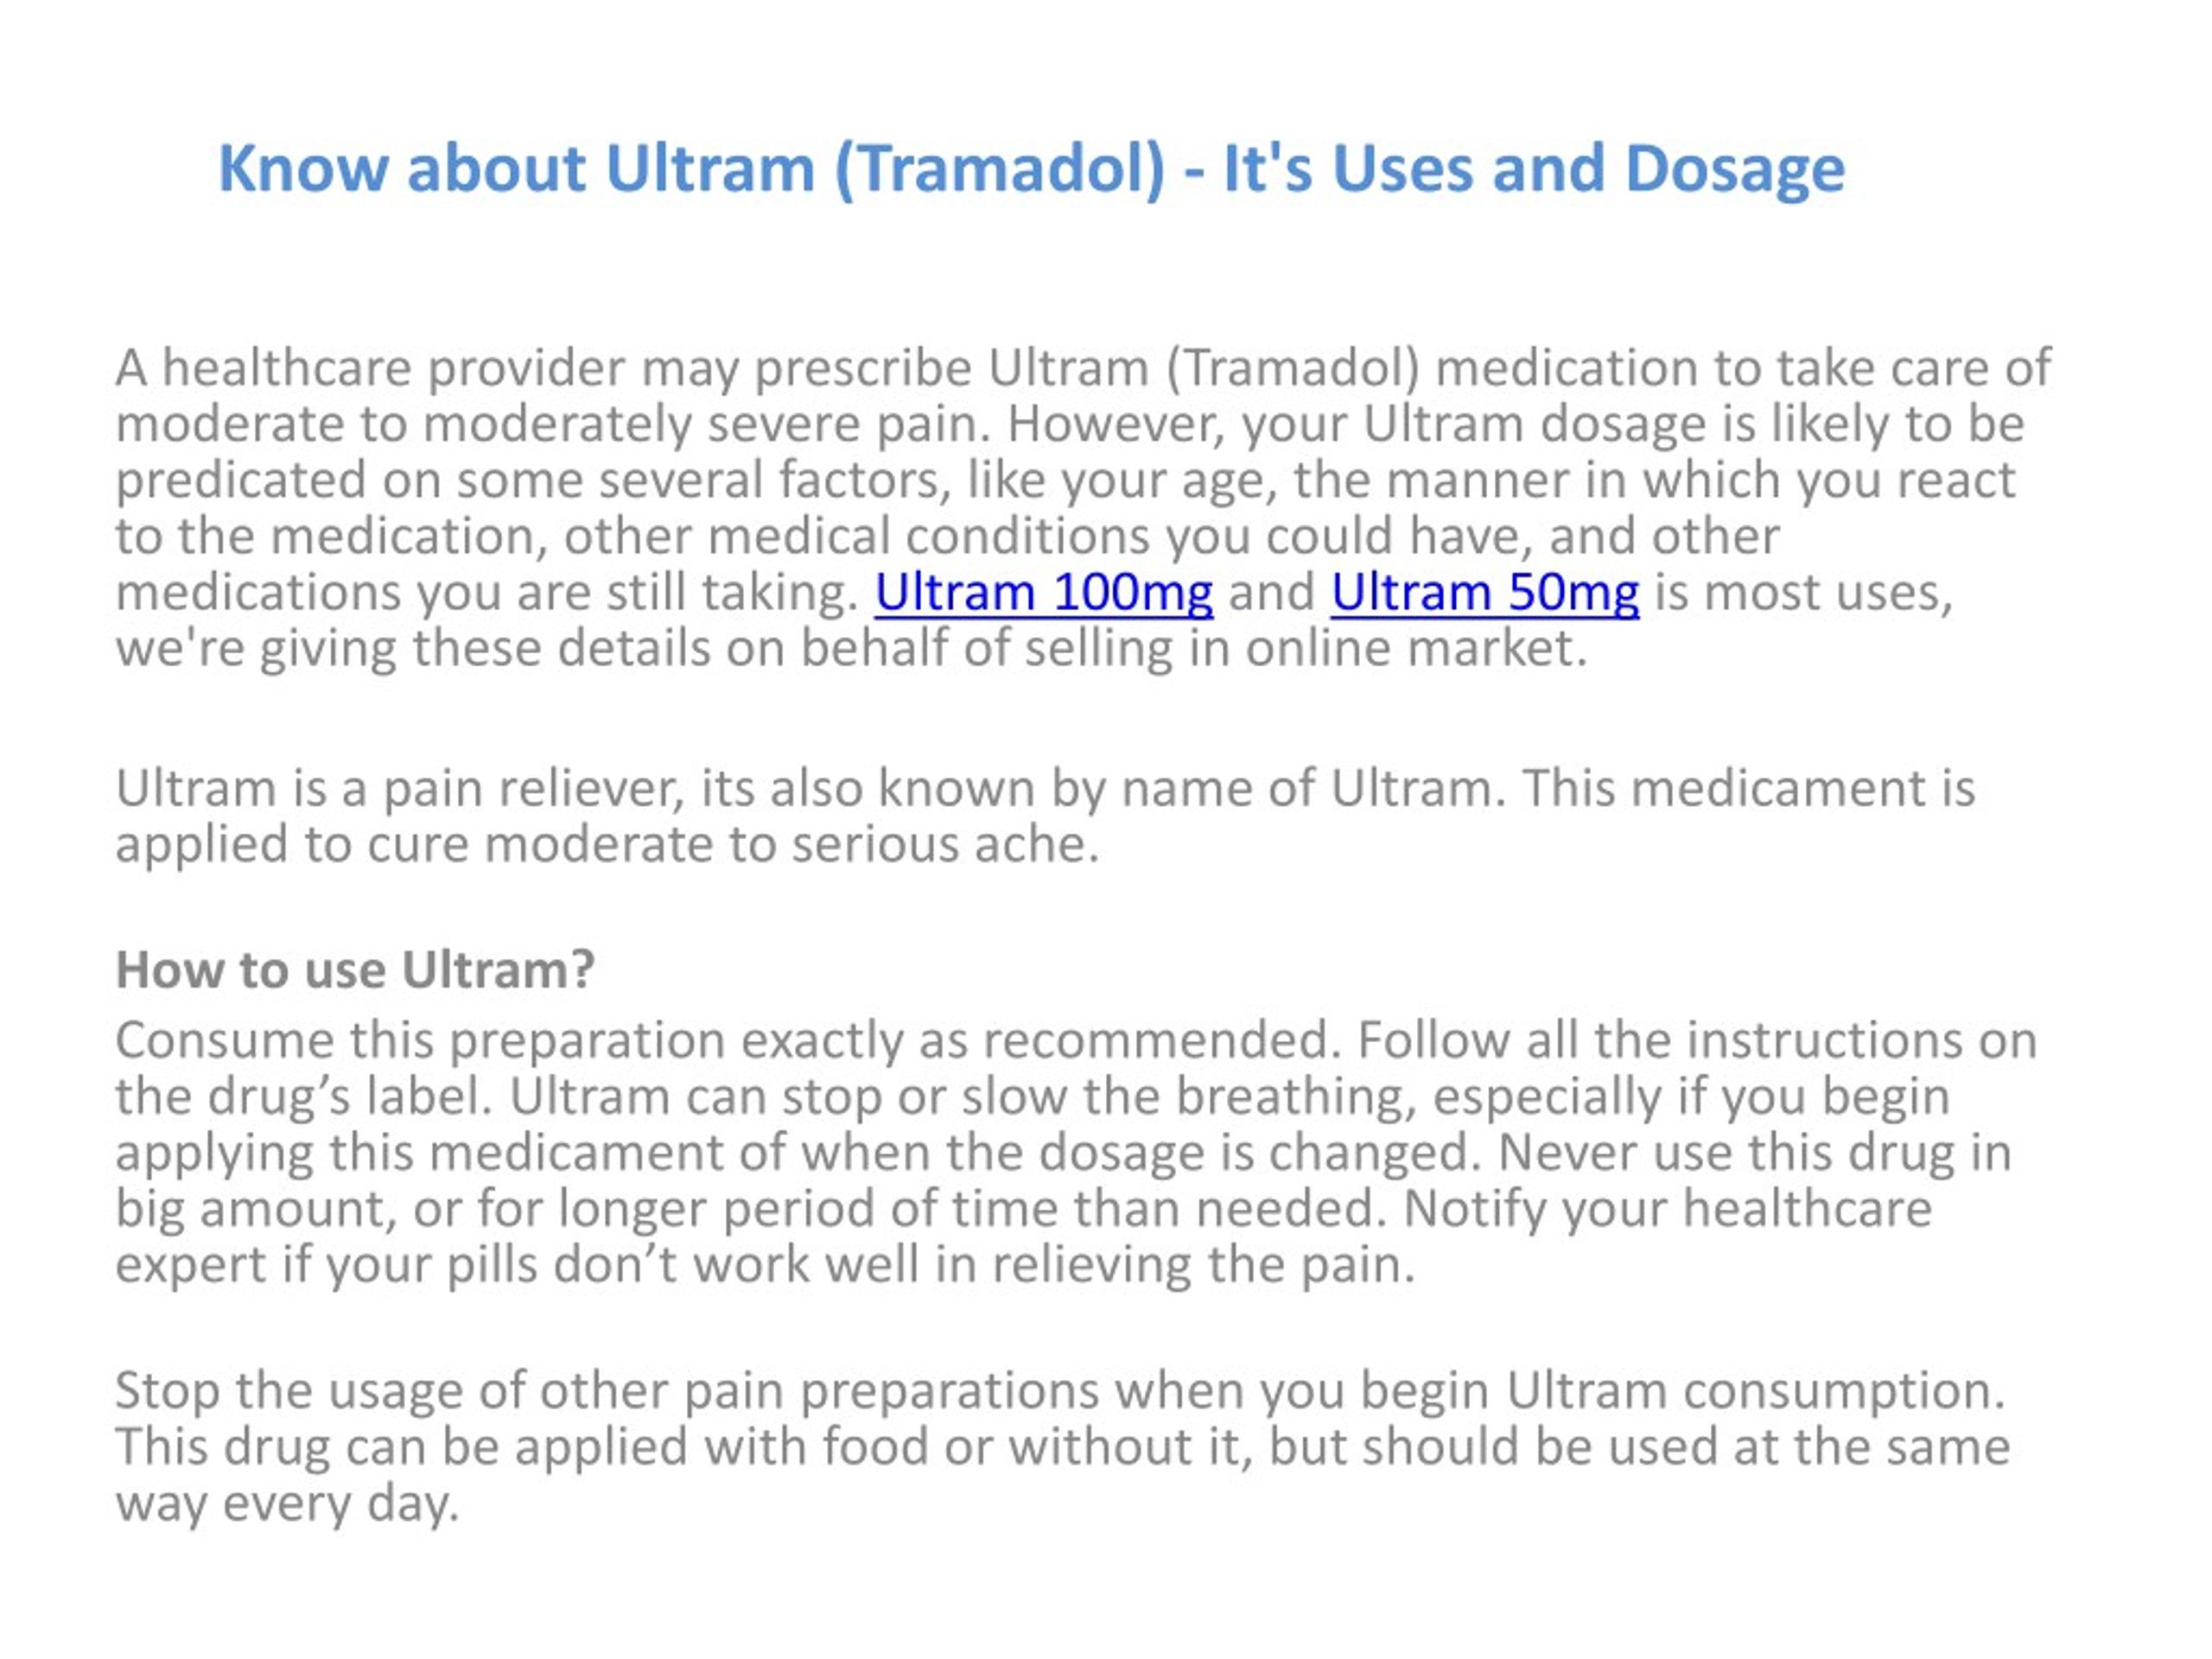 Ppt Know About Ultram Tramadol It S Uses And Dosage Powerpoint Presentation Id